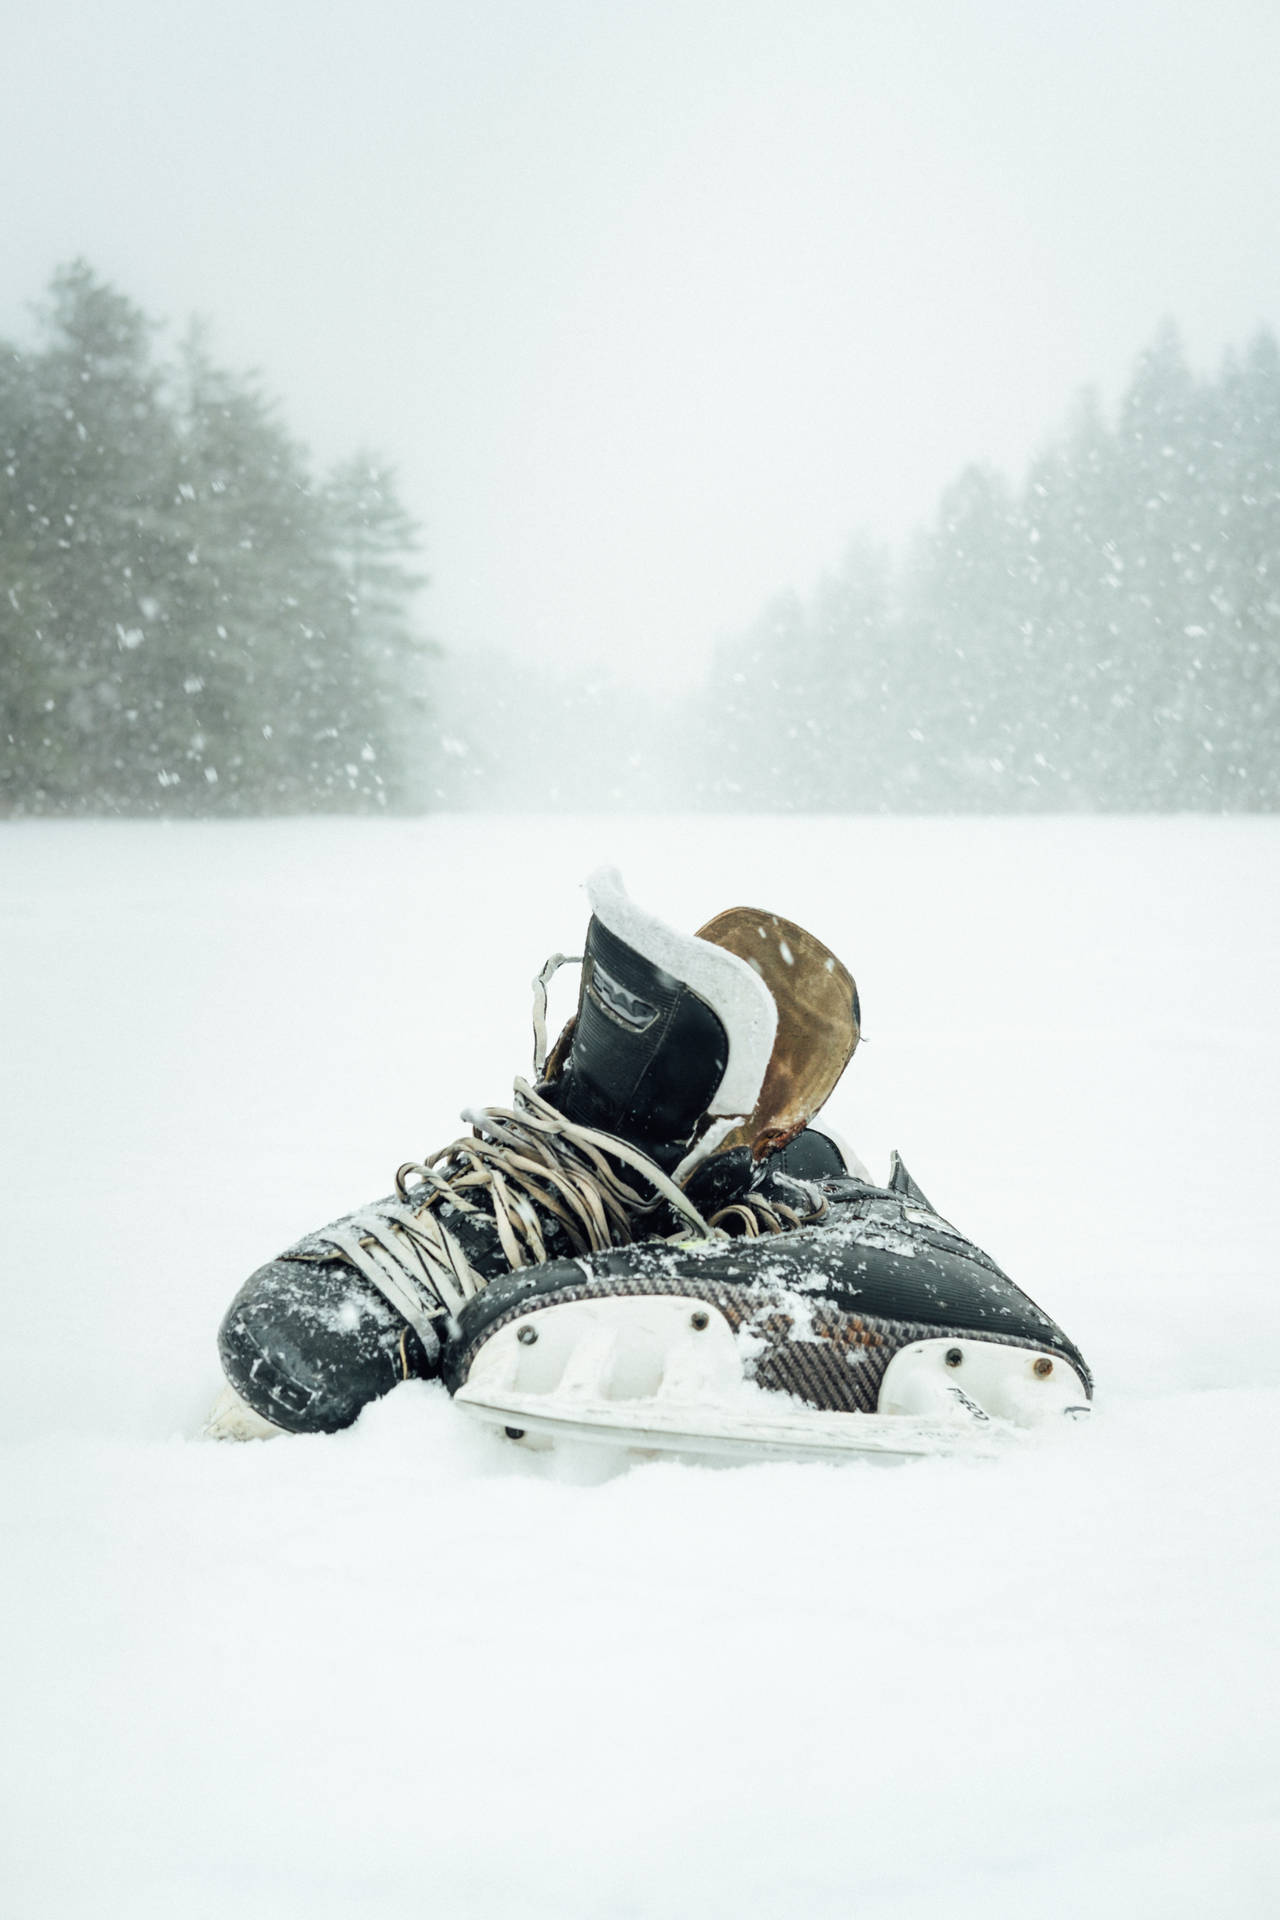 Ice Hockey Shoes In Snow Background